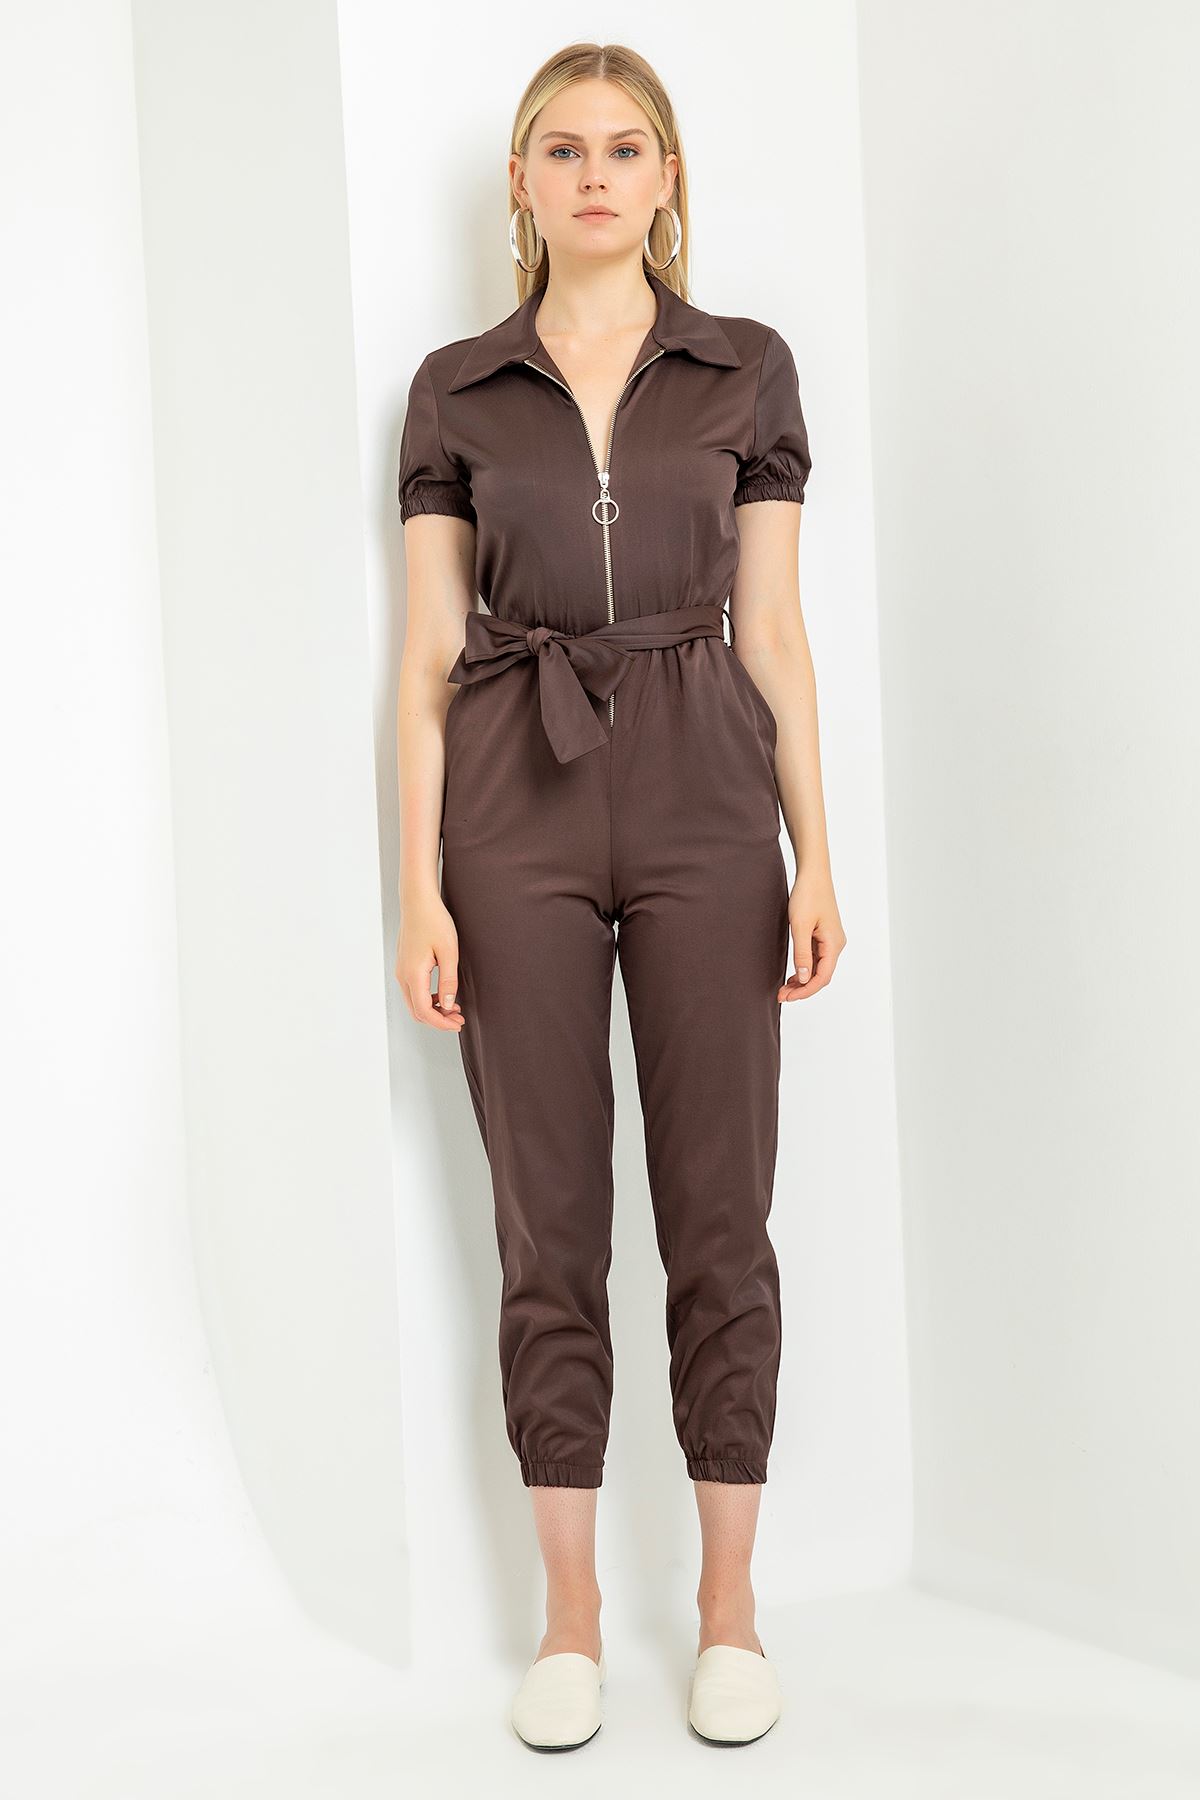 Erika Fabric Short Sleeve Ankle Length Zip Belted Women Overalls - Brown